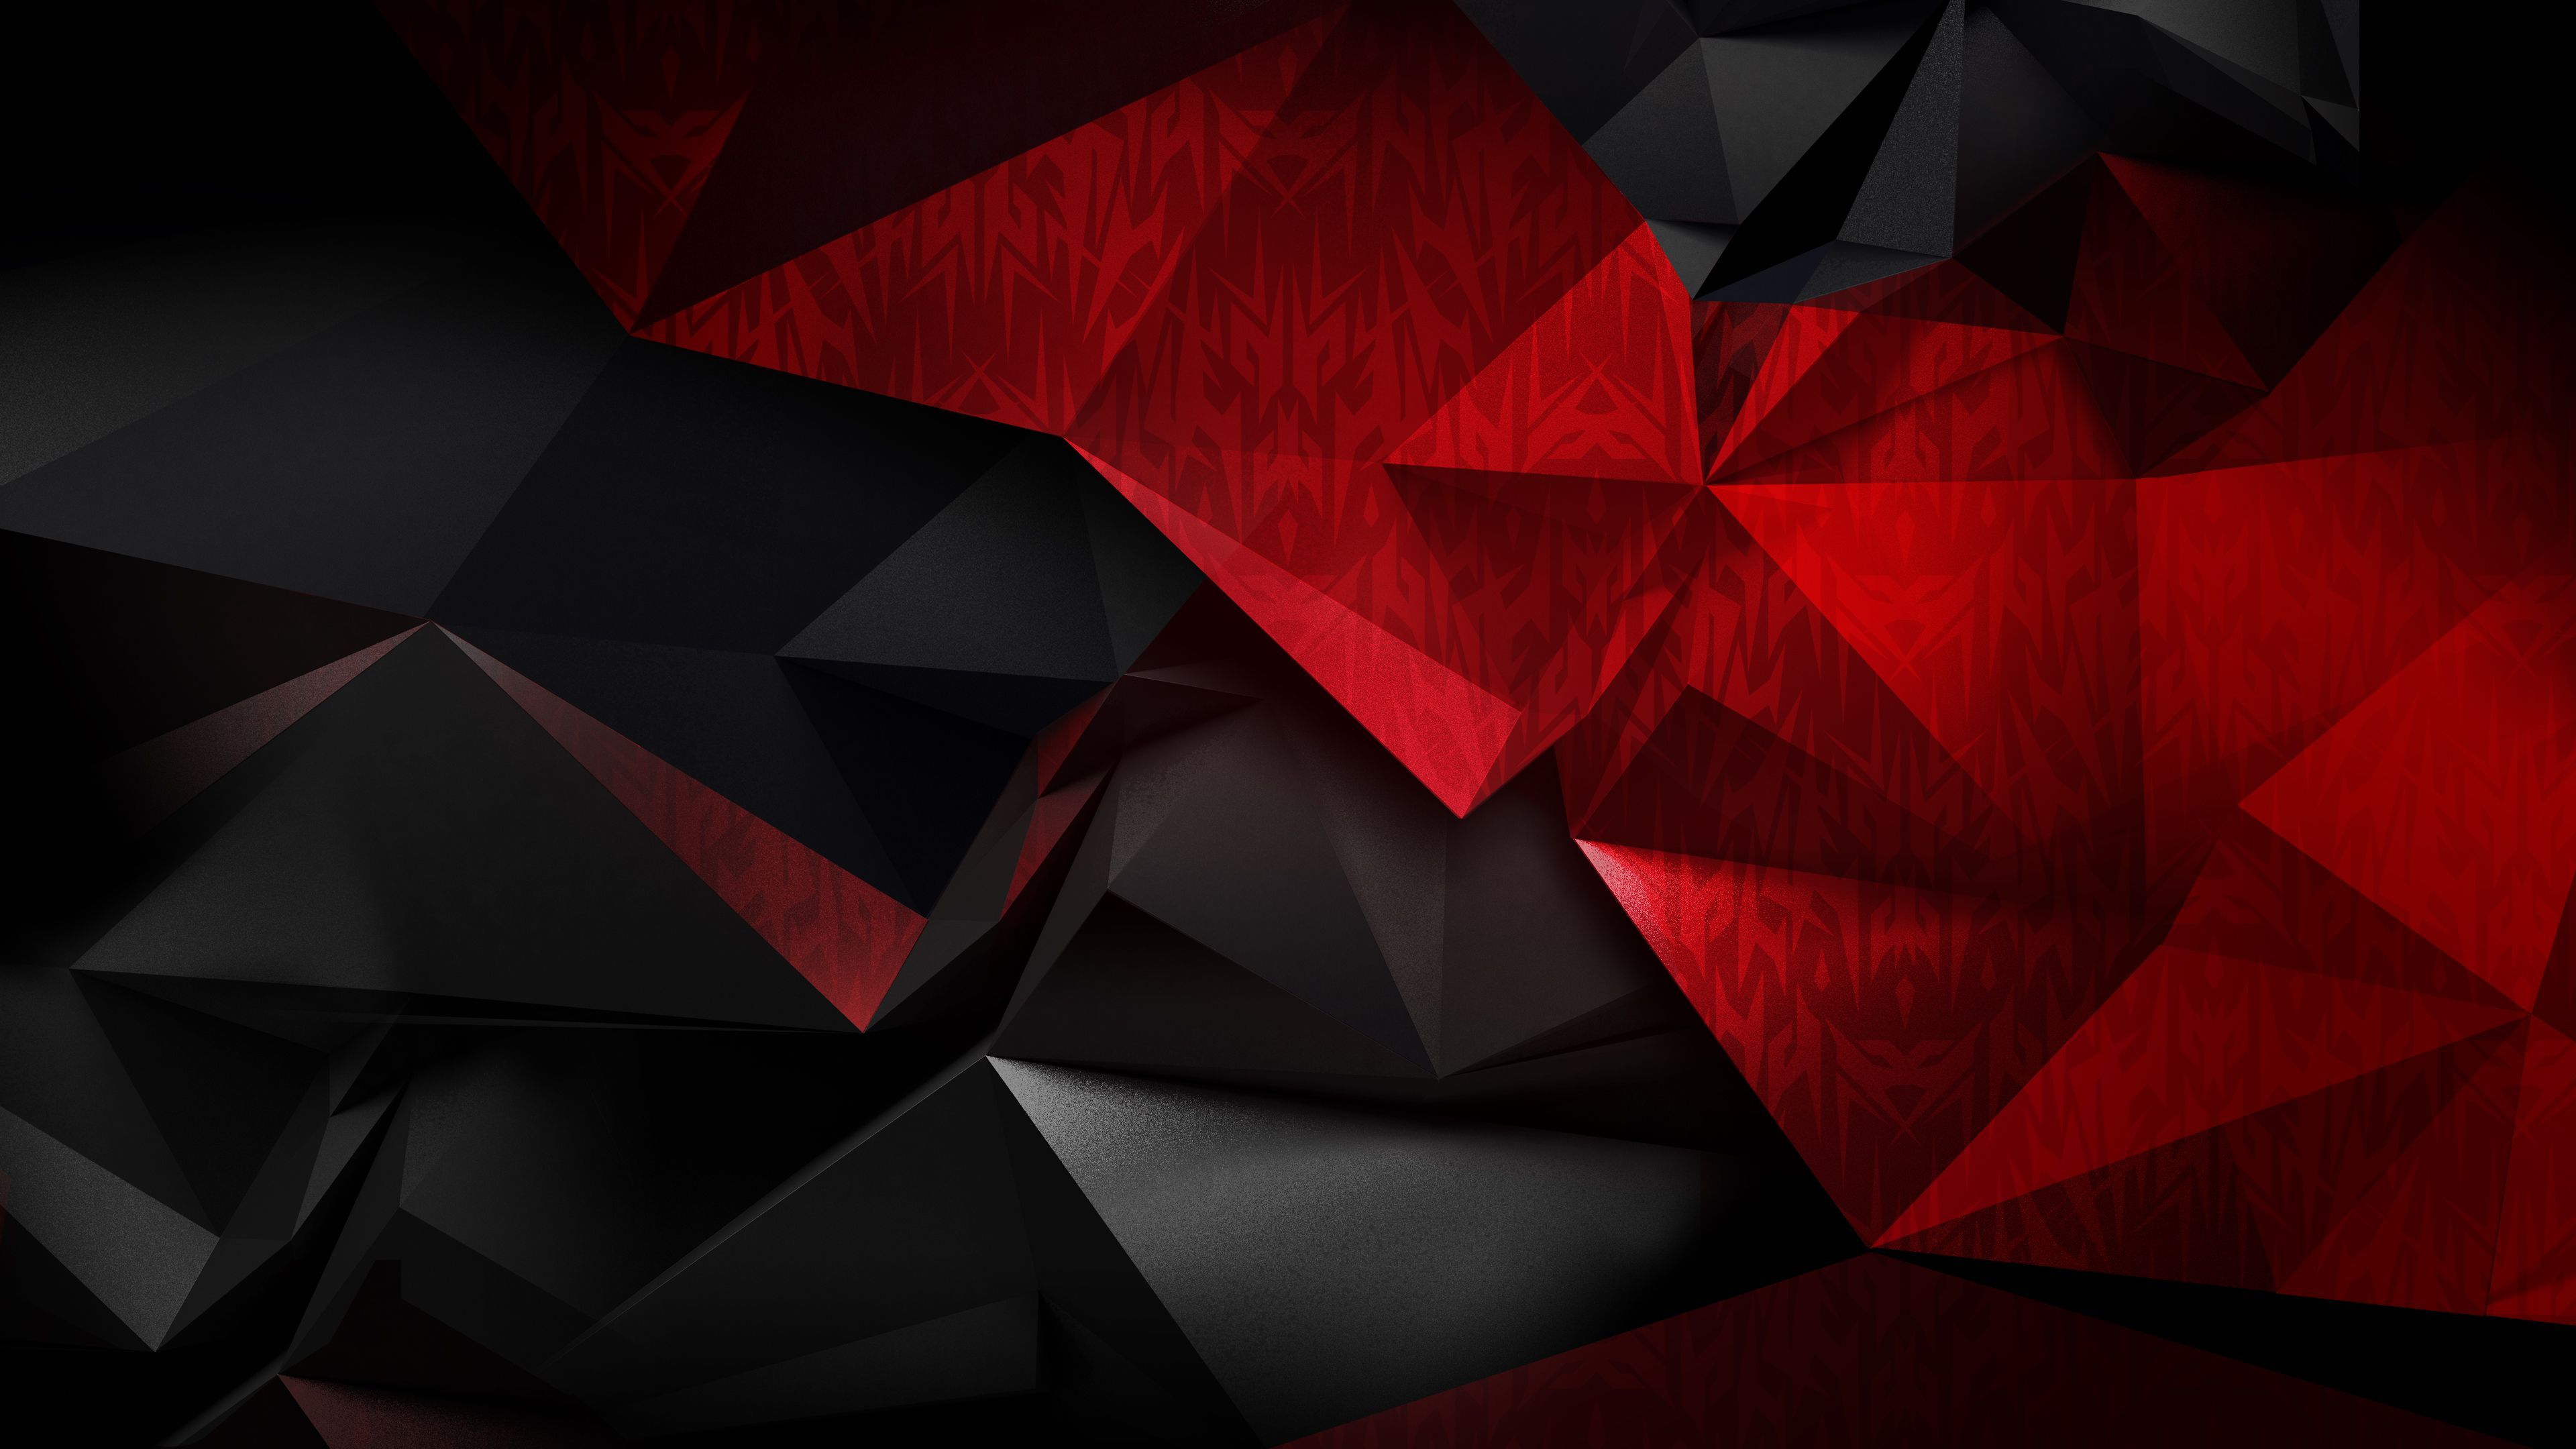 Acer Nitro Wallpapers On Wallpaperdog Enjoy and share your favorite beautiful hd wallpapers and background images. acer nitro wallpapers on wallpaperdog